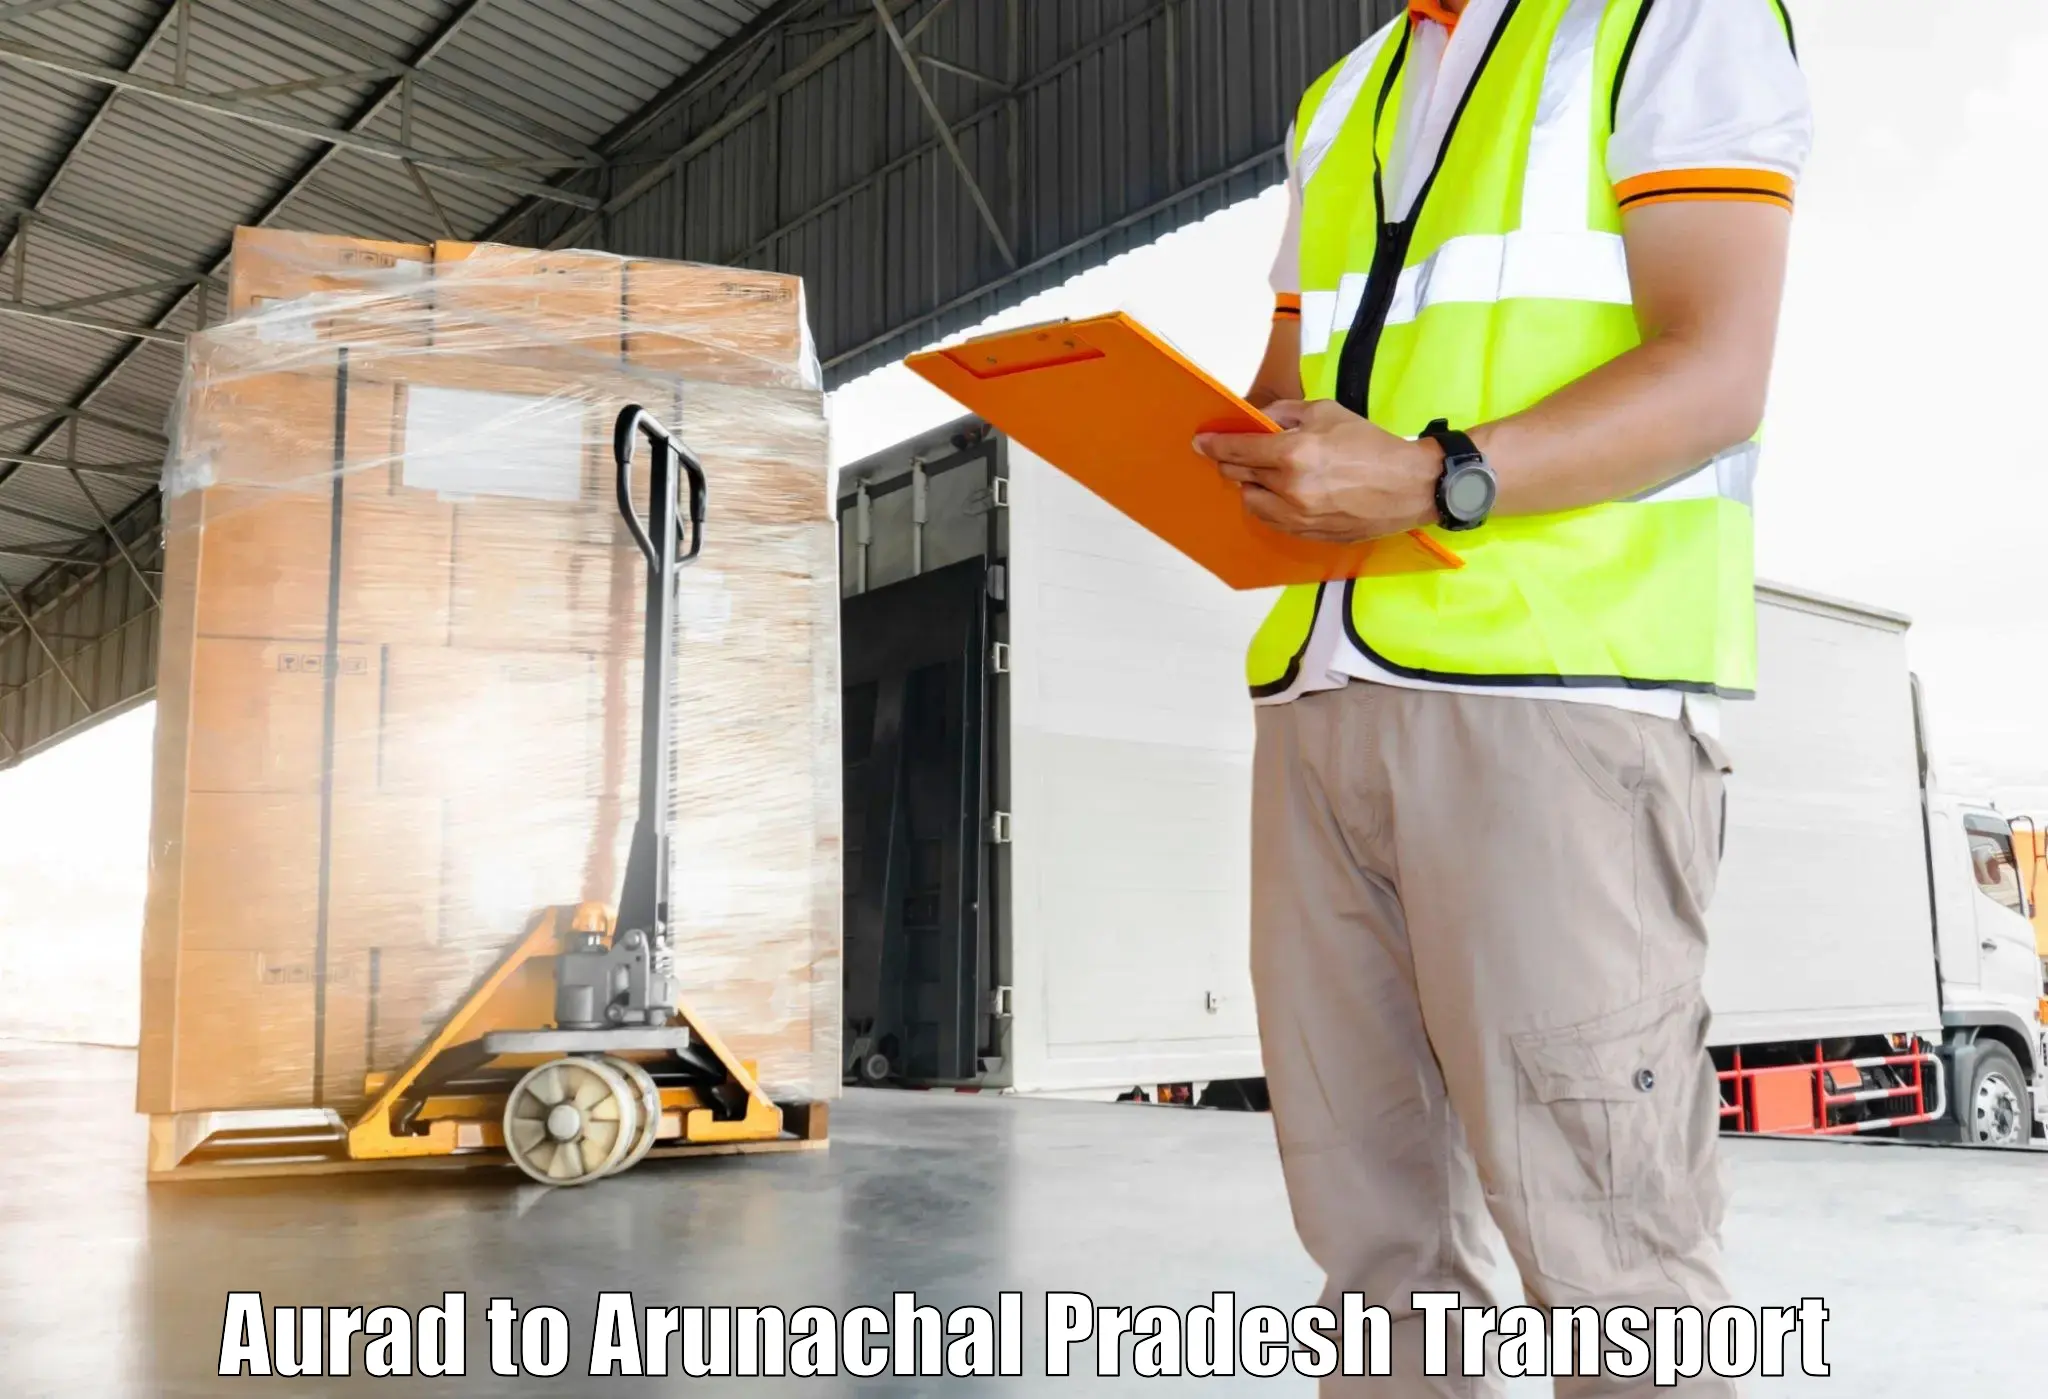 Container transport service Aurad to Dirang